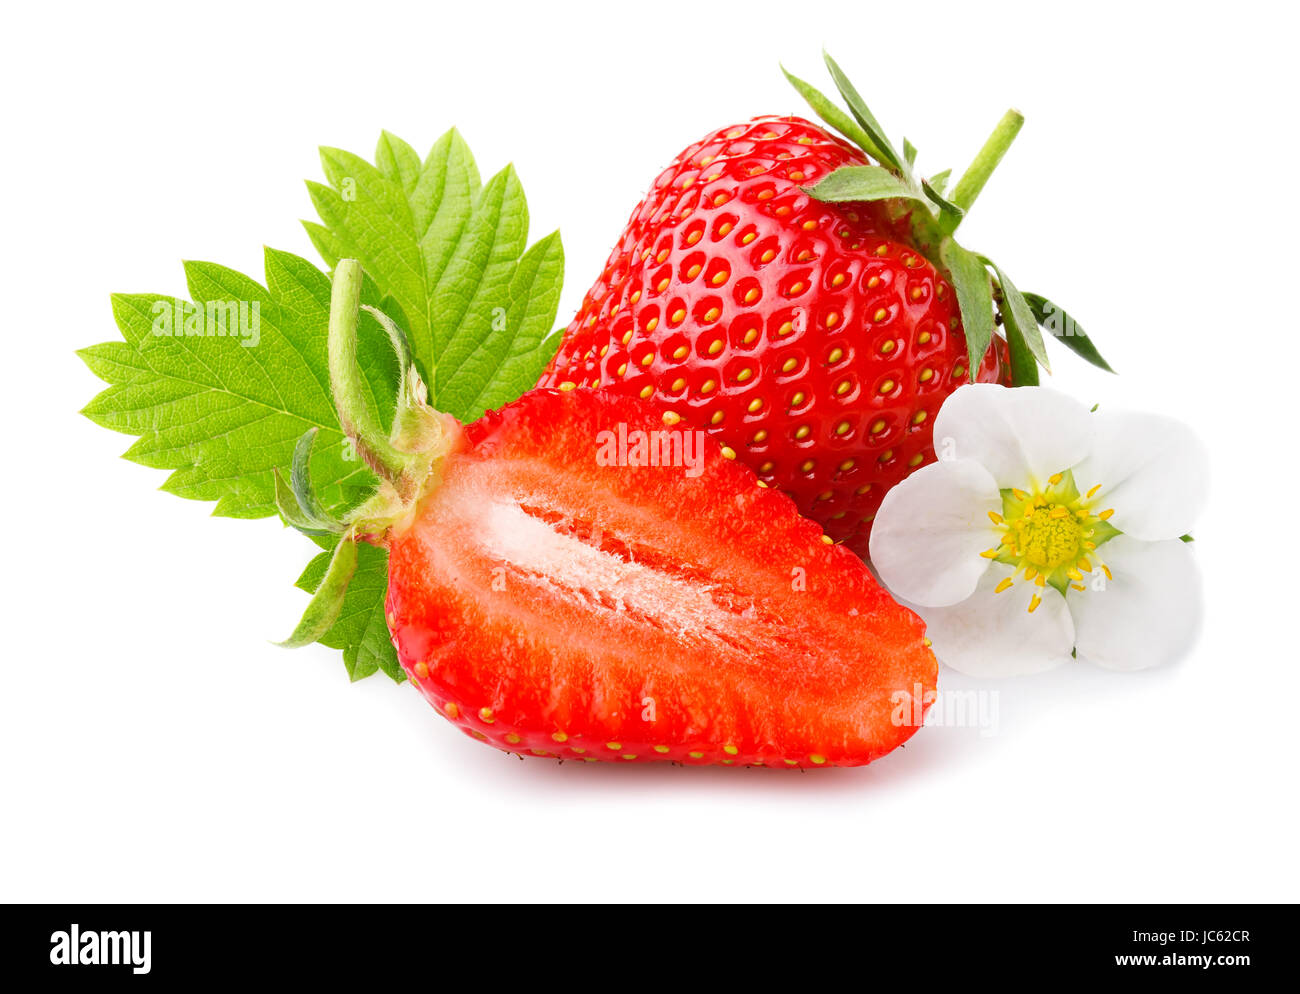 Strawberries with leaves and blossom isolated on a white background Stock Photo